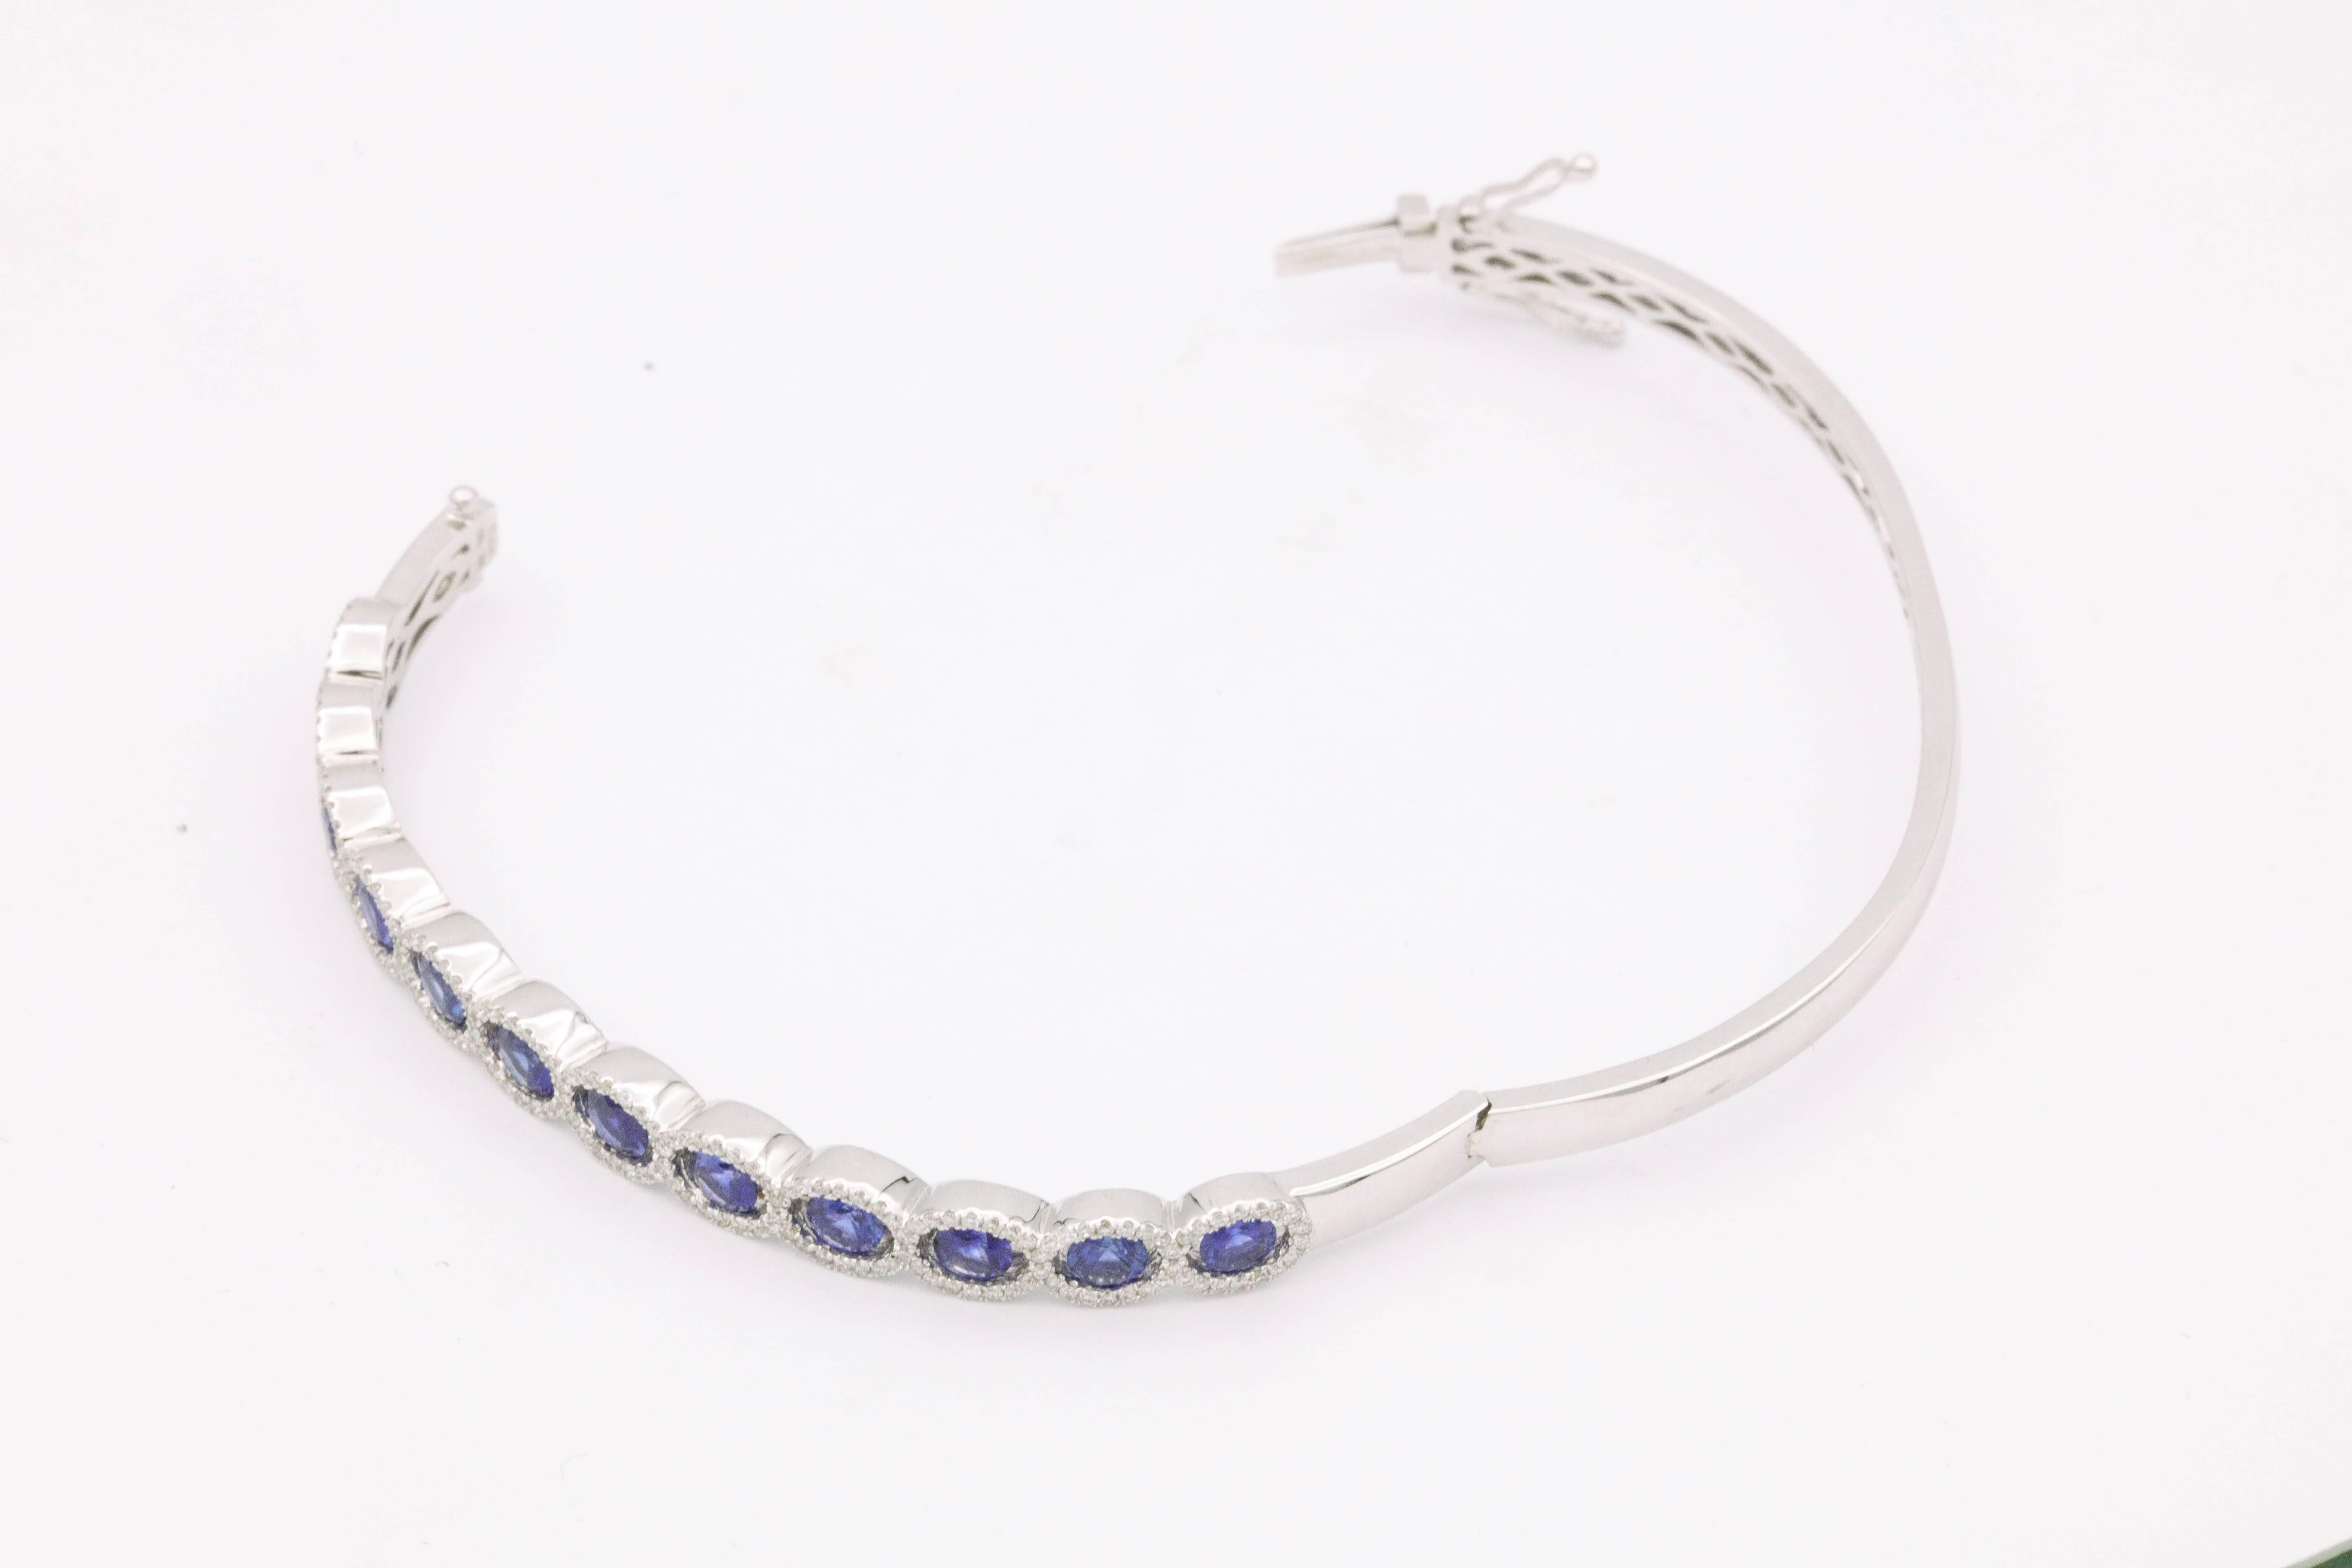 18K white gold
12 Sapphire 2.09 cts. total weight
191 Diamonds 0.52 cts. total weight
11.5 g.
6 cm wide